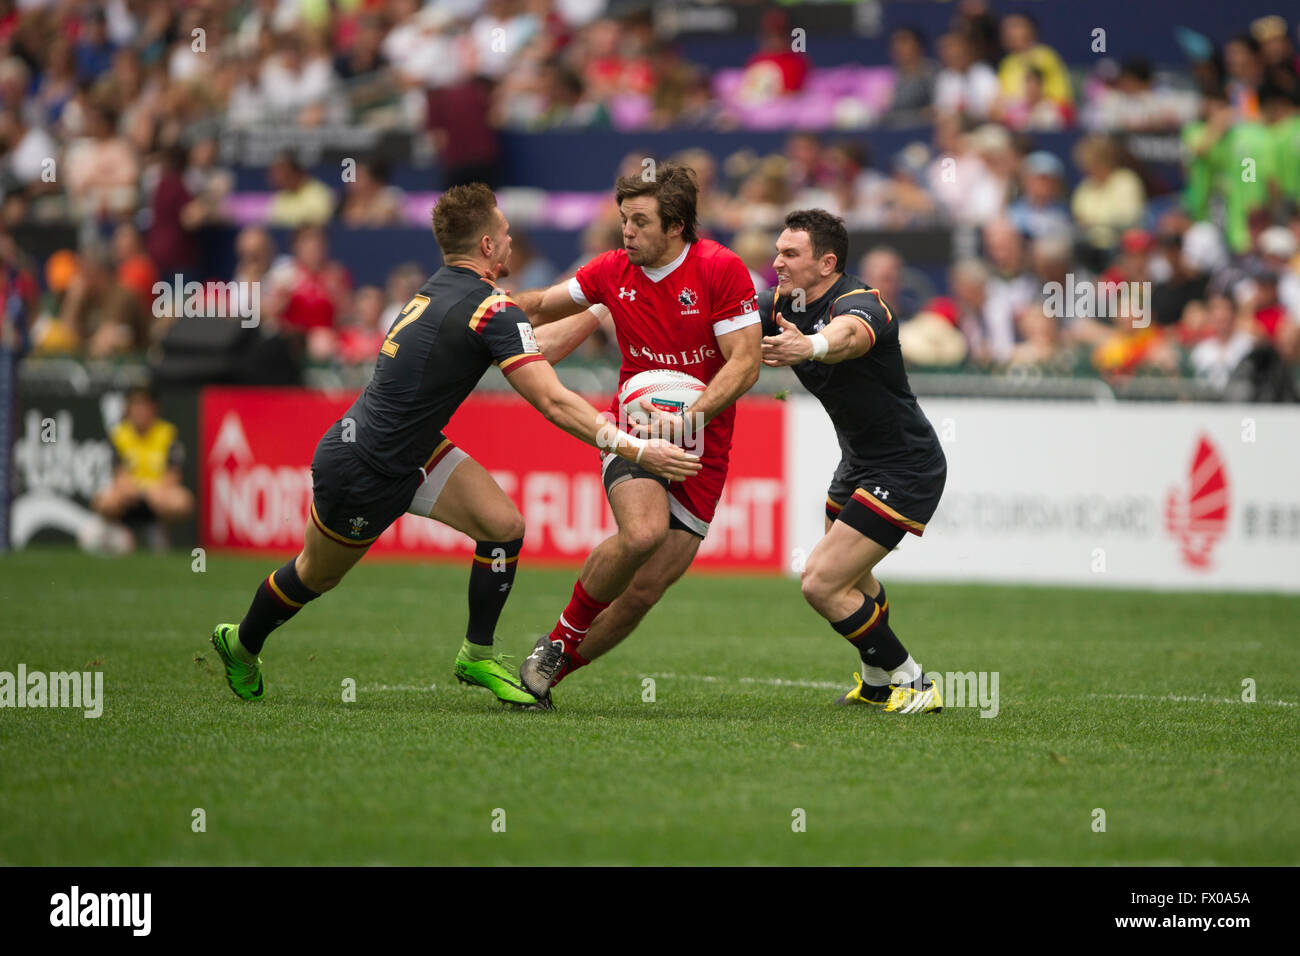 Hong Kong, China. 9, April, 2016. HSBC World Rugby Sevens Series-round 7, Hong Kong Stadium. Wales vs Canada (red). Wales wins 24-10. Credit:  Gerry Rousseau/Alamy Live News Stock Photo